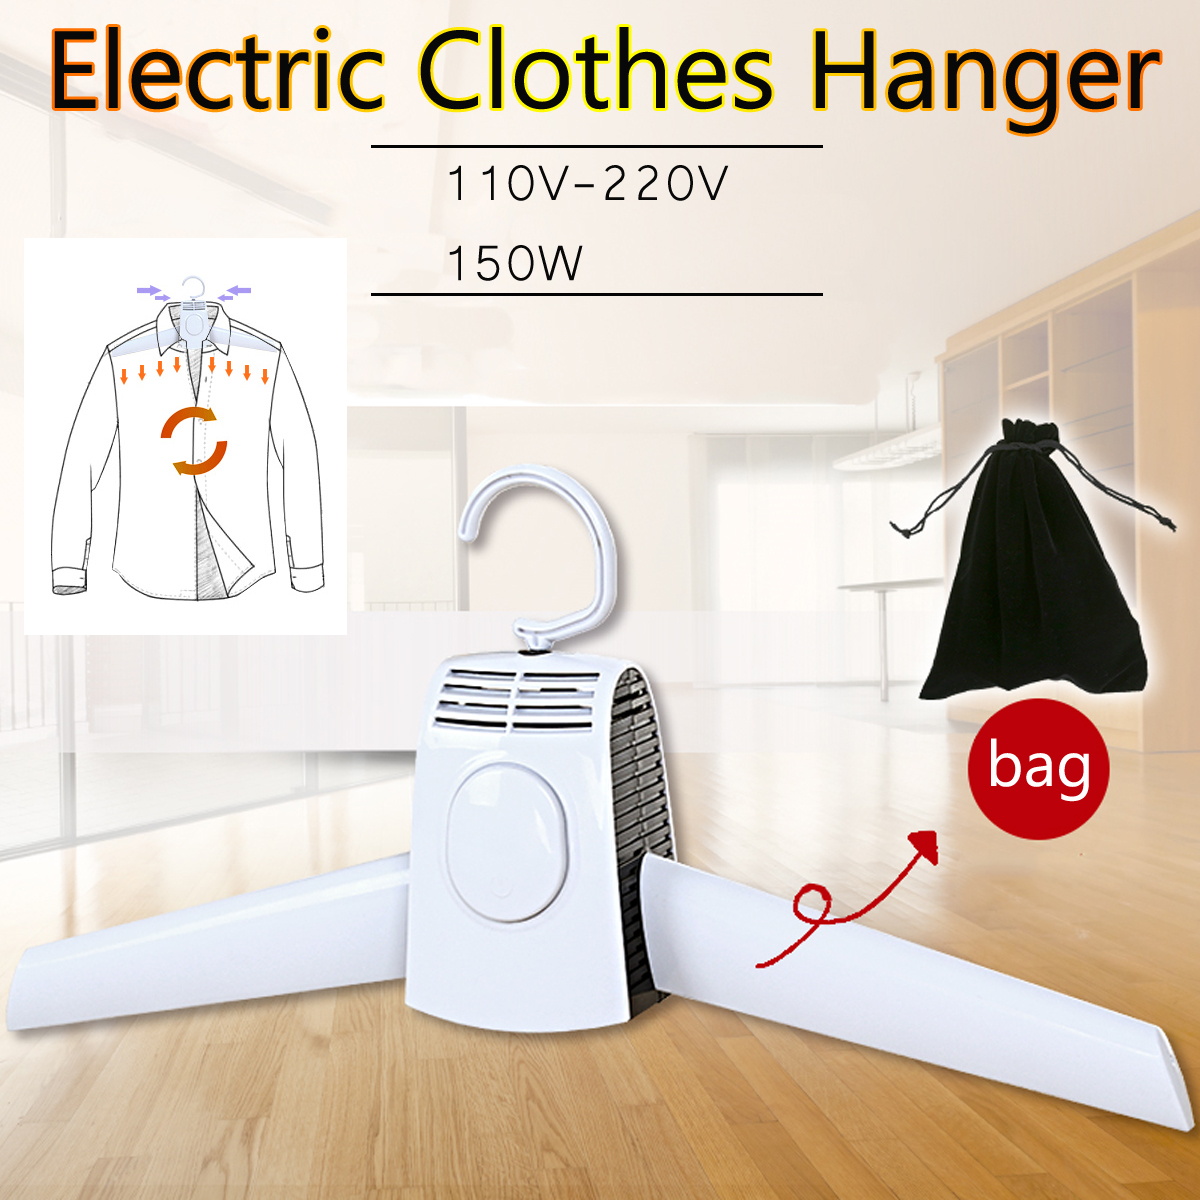 220V 50W Portable Clothes Dryer Foldable Laundry Dryer Smart Shoes Dryer Coat Clothes Electric Rack Hanger for Home Travel